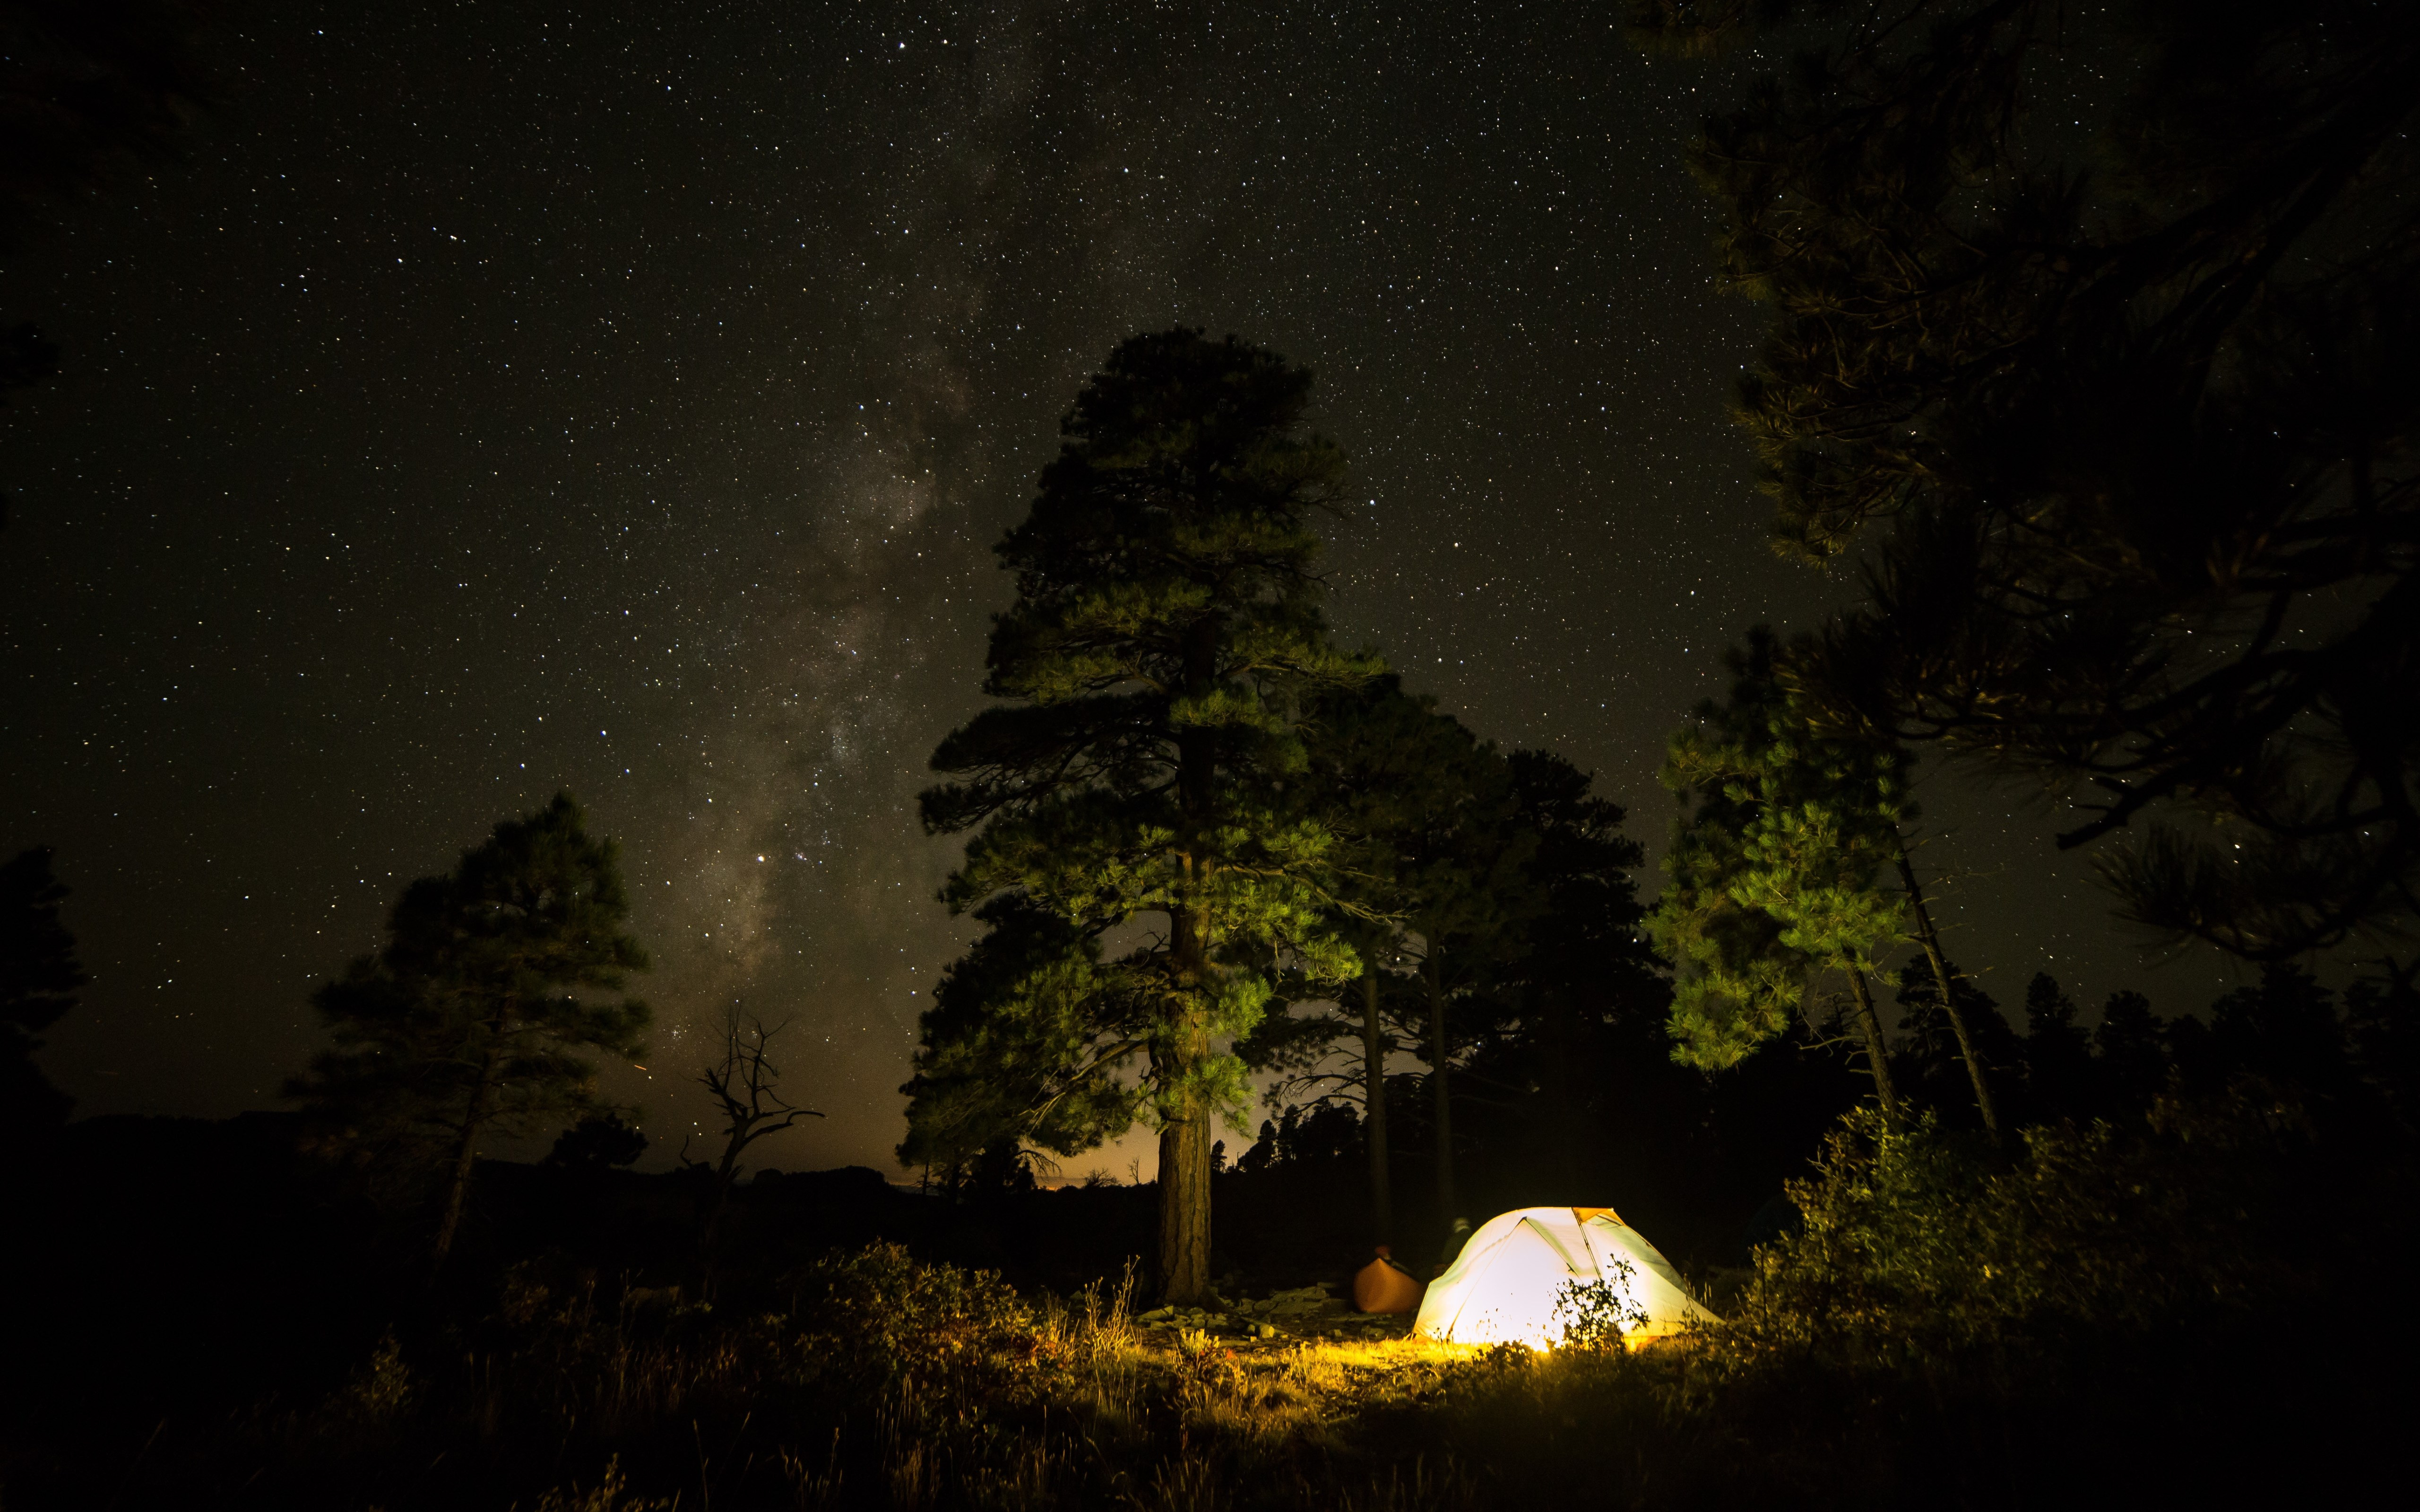 With tent under the night sky wallpaper 5120x3200